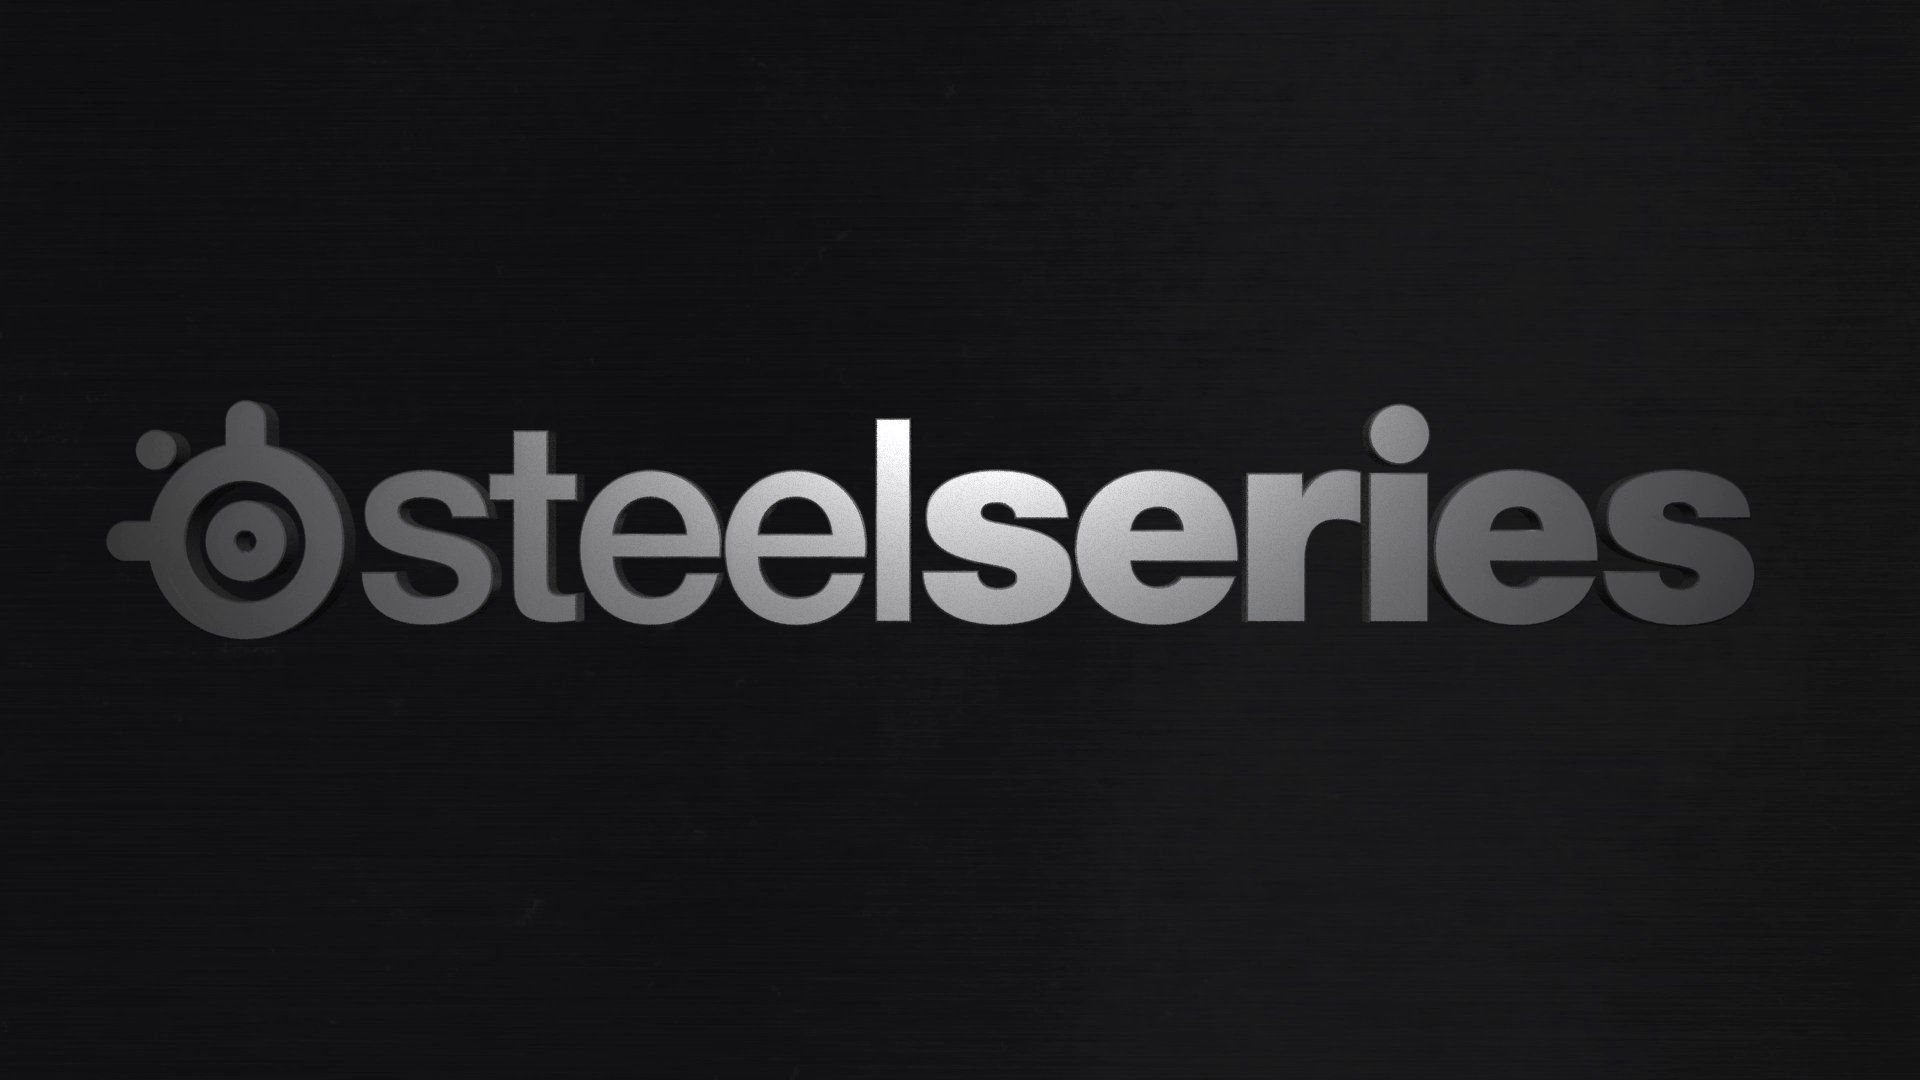 STEELSERIES Gaming computer f wallpaper | 1920x1080 | 401460 ...